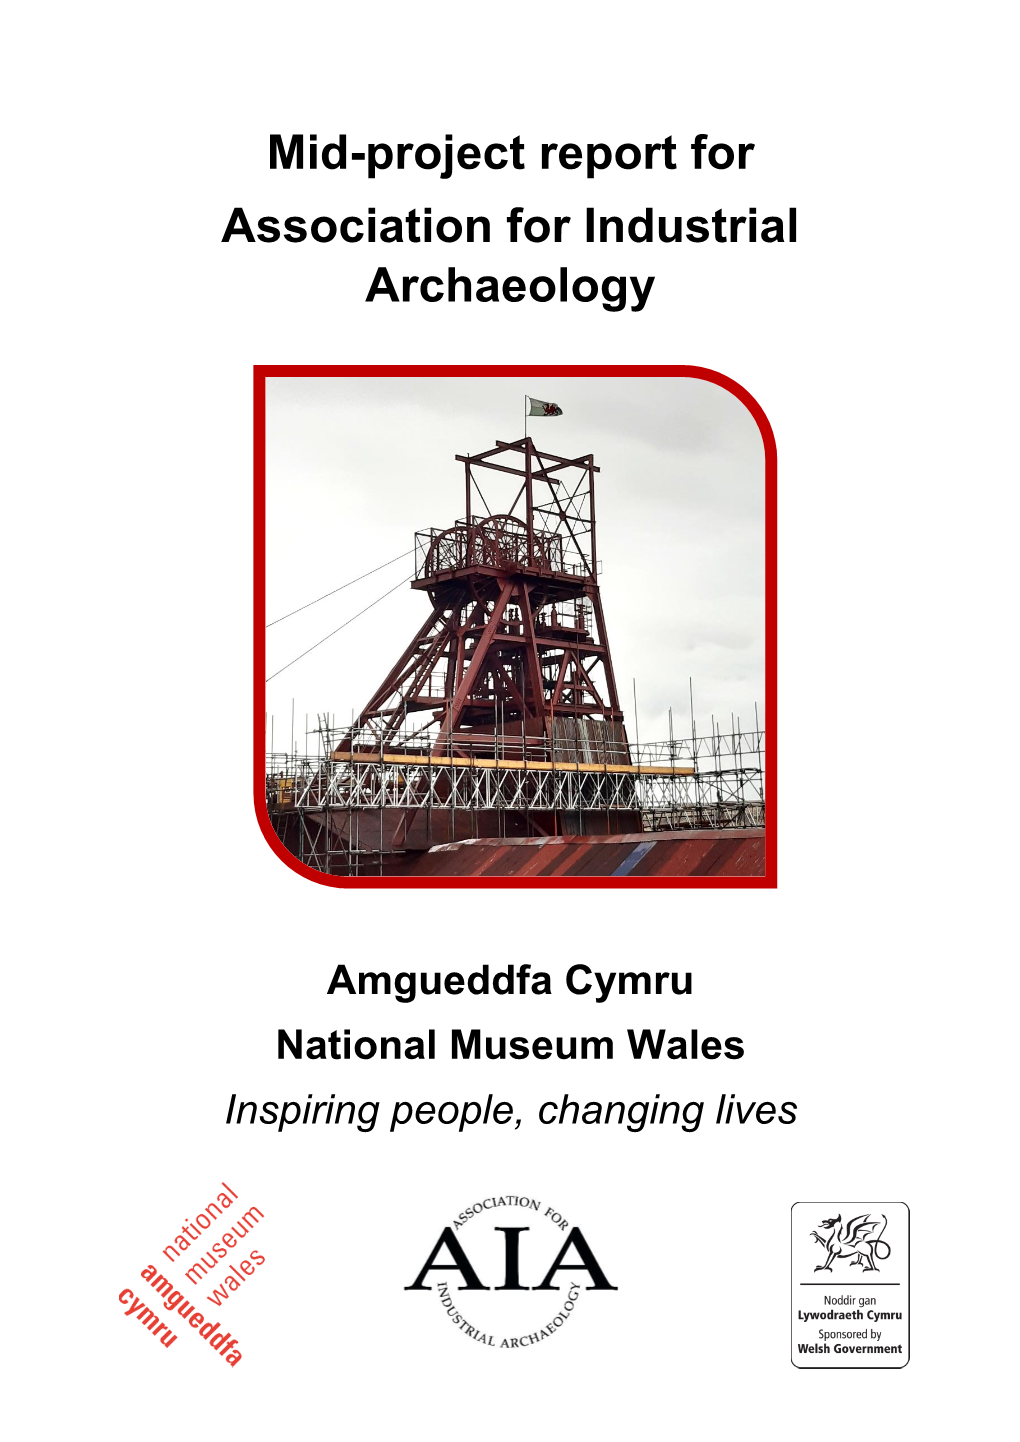 Mid-Project Report for Association for Industrial Archaeology